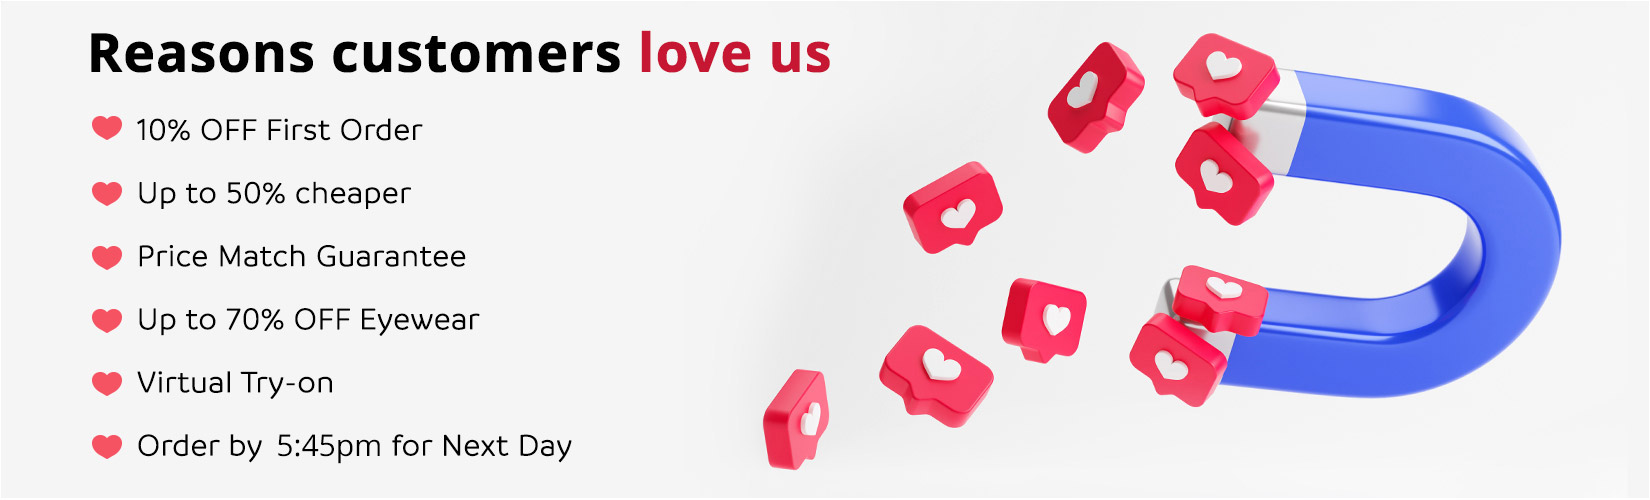 Cutomers love us banner banner affilities page